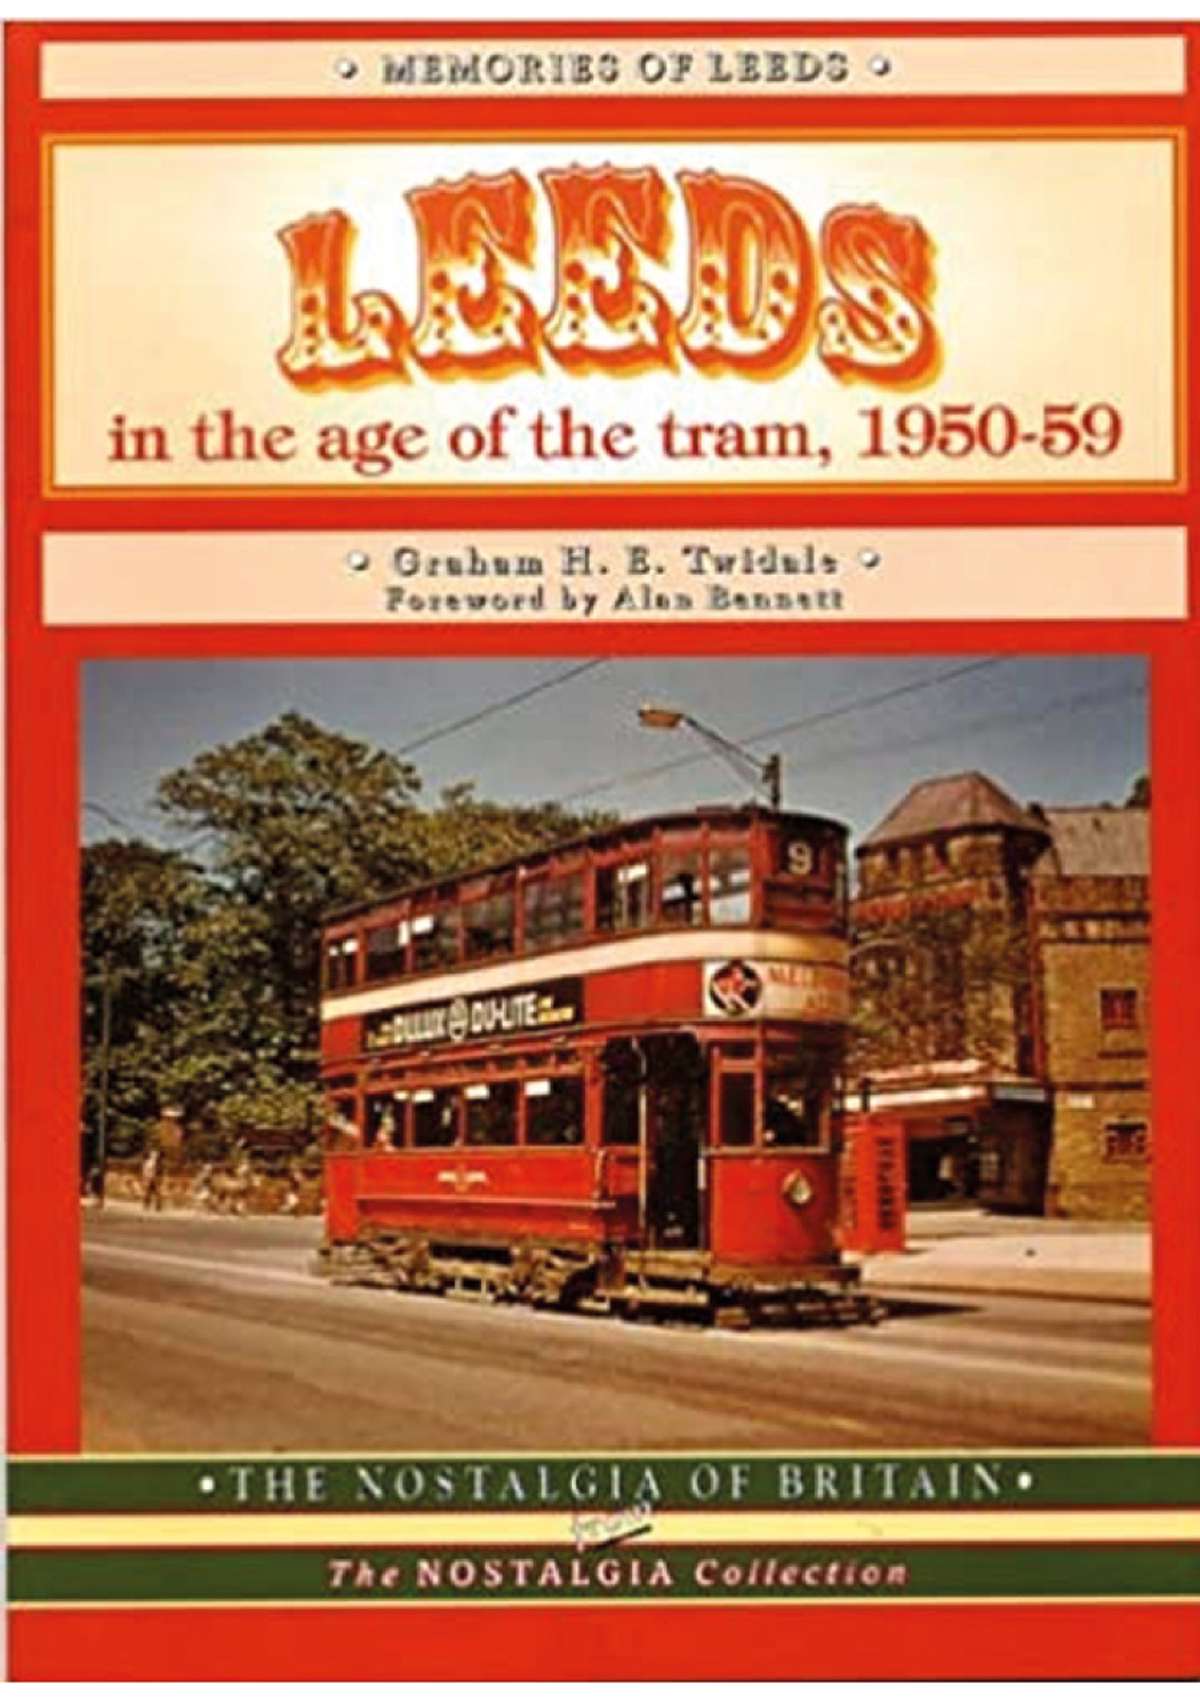 1876 - Leeds In the Age of the Tram